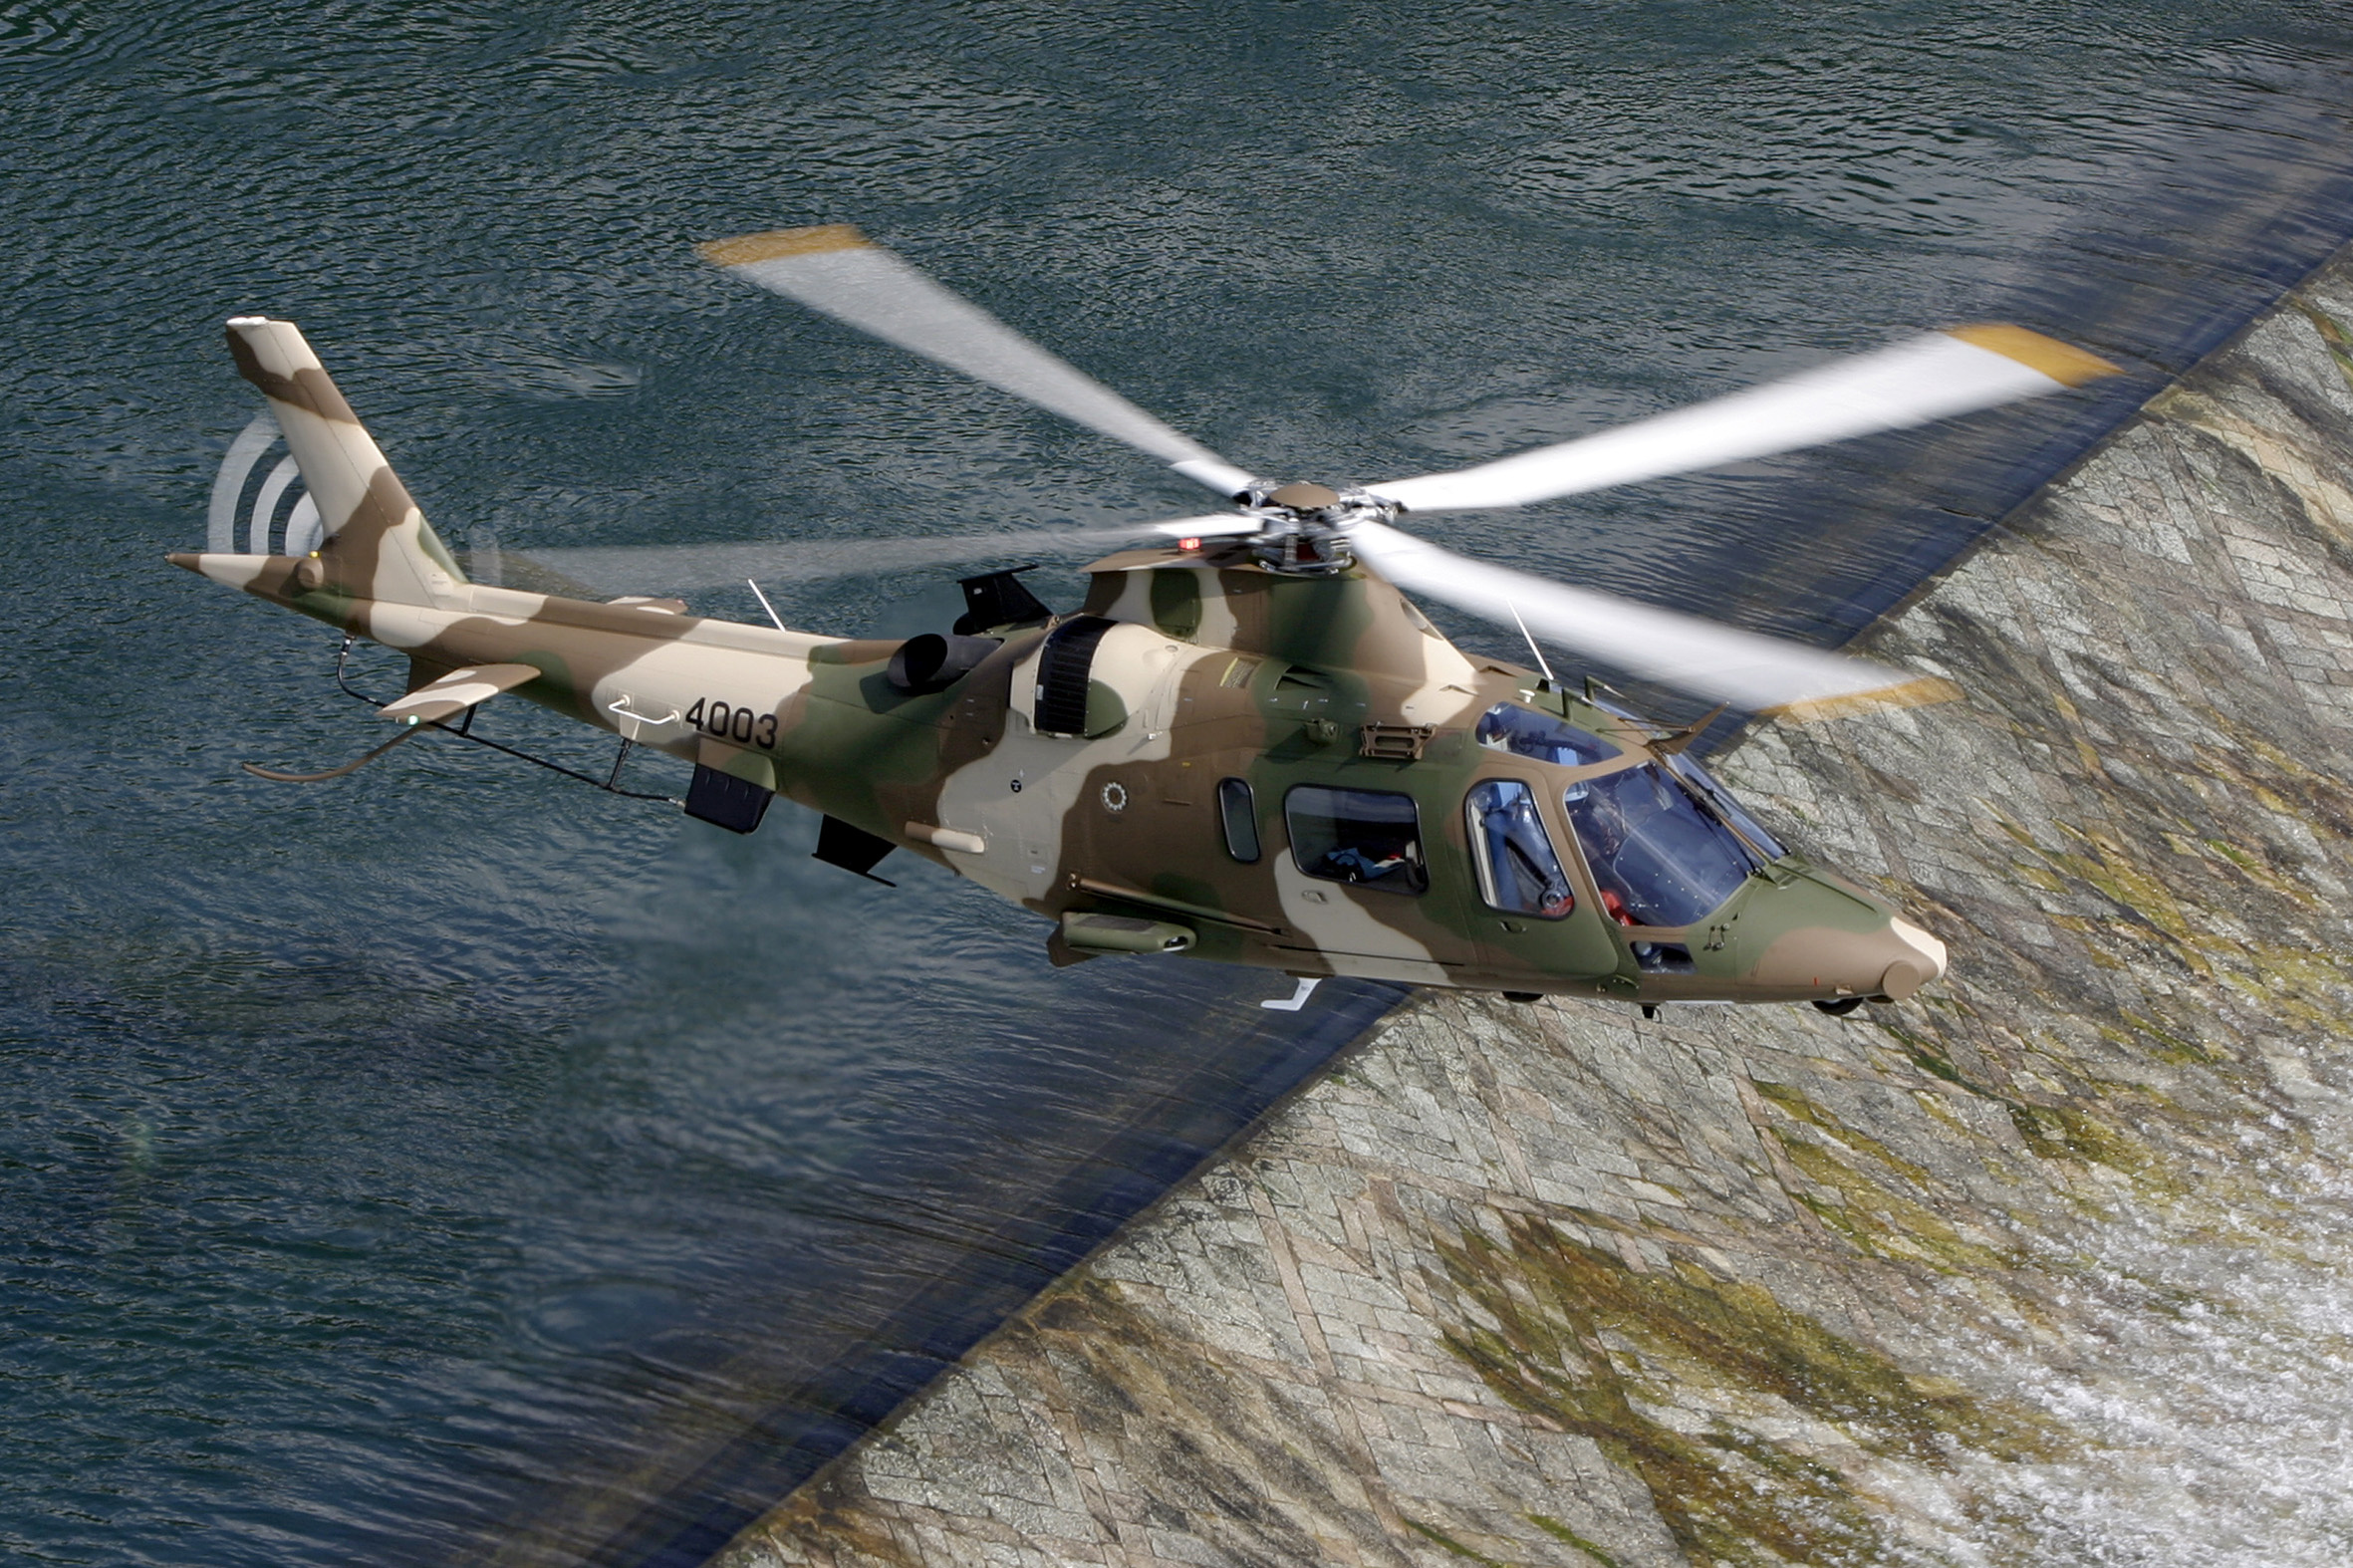 AgustaWestland AW109 HD Wallpapers and Backgrounds 2370x1580